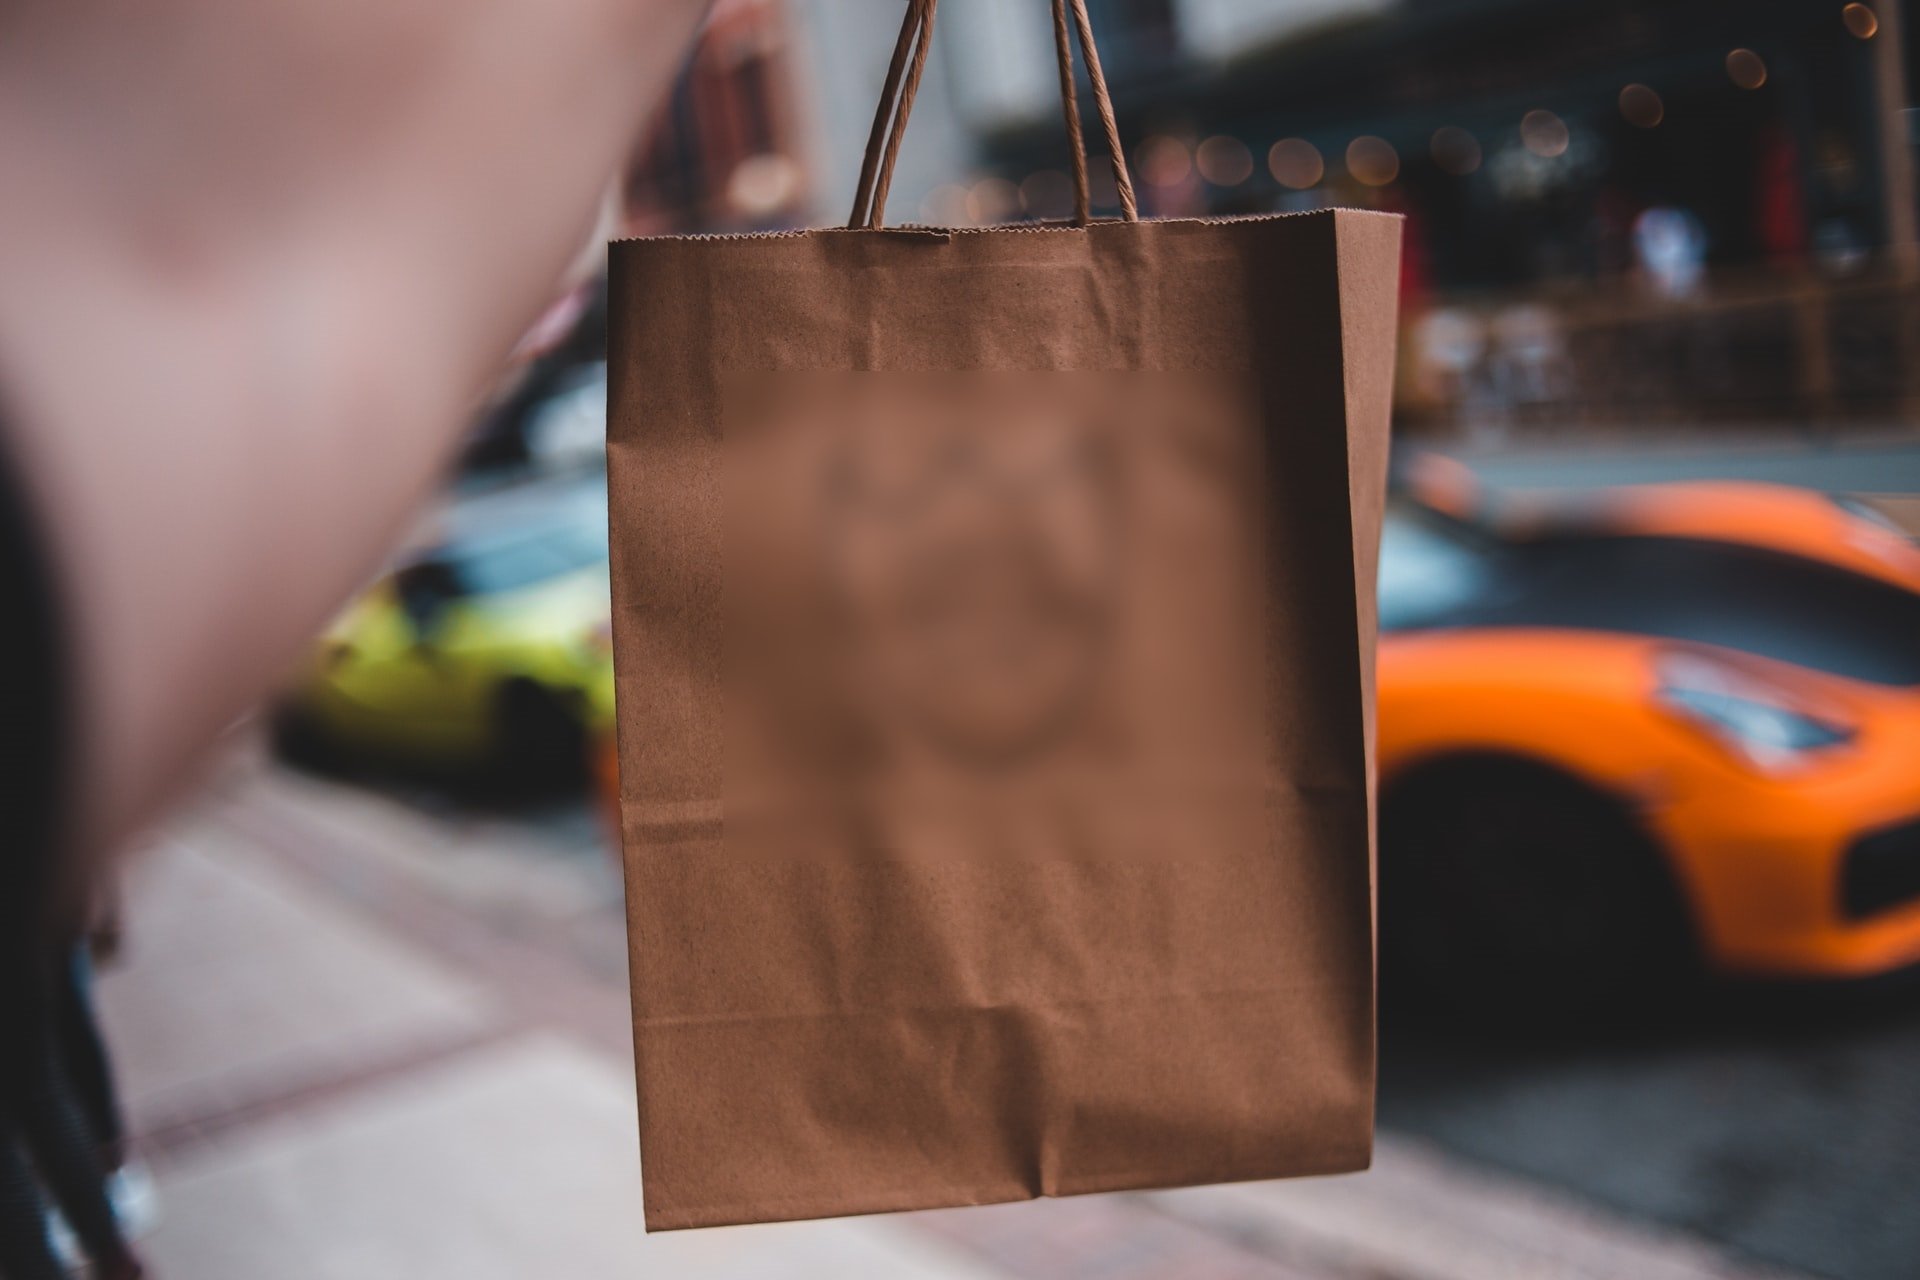 She offered him the to-go bag and felt amazing about her good deed. | Source: Unsplash